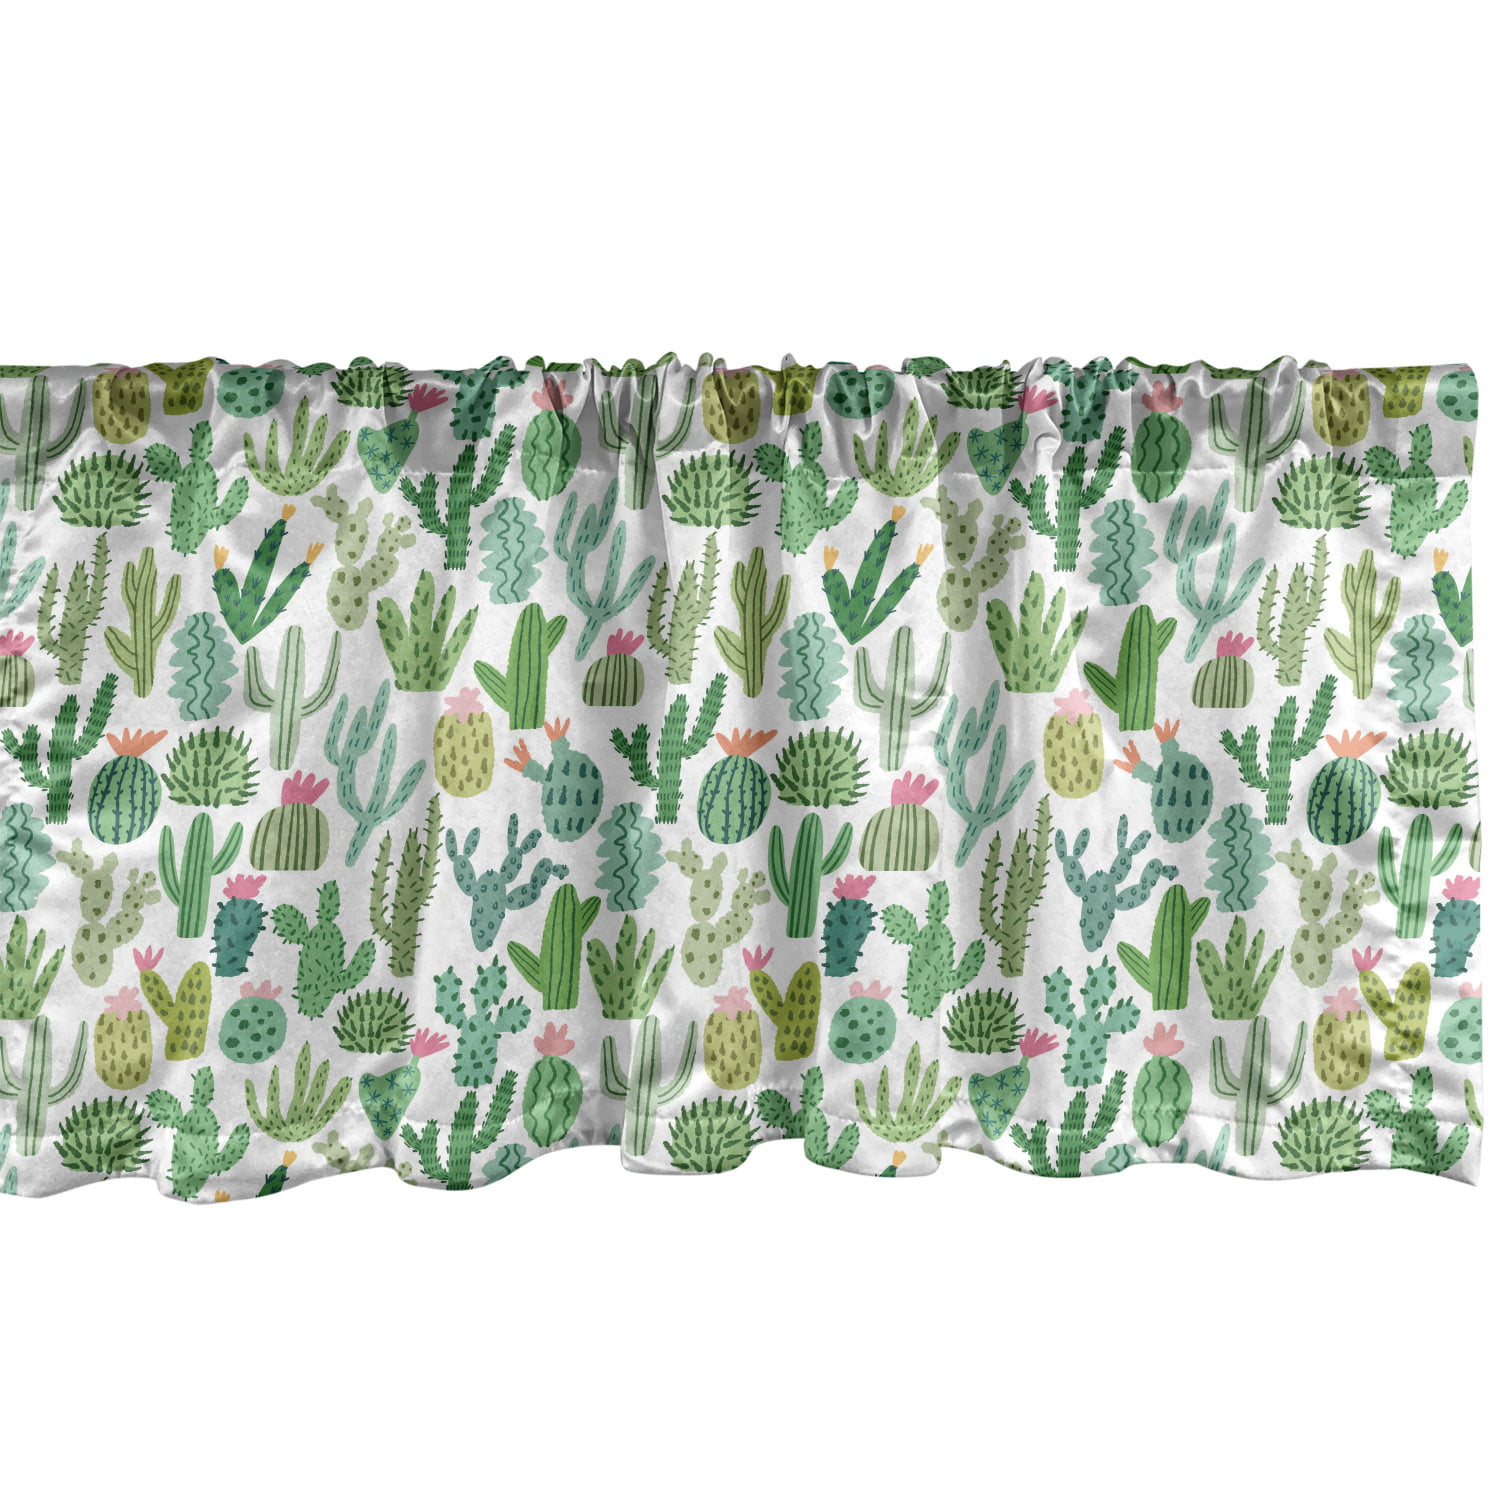 Cactus Window Valance Pack of 2, Continuous Cacti Plants Mexican Theme ...